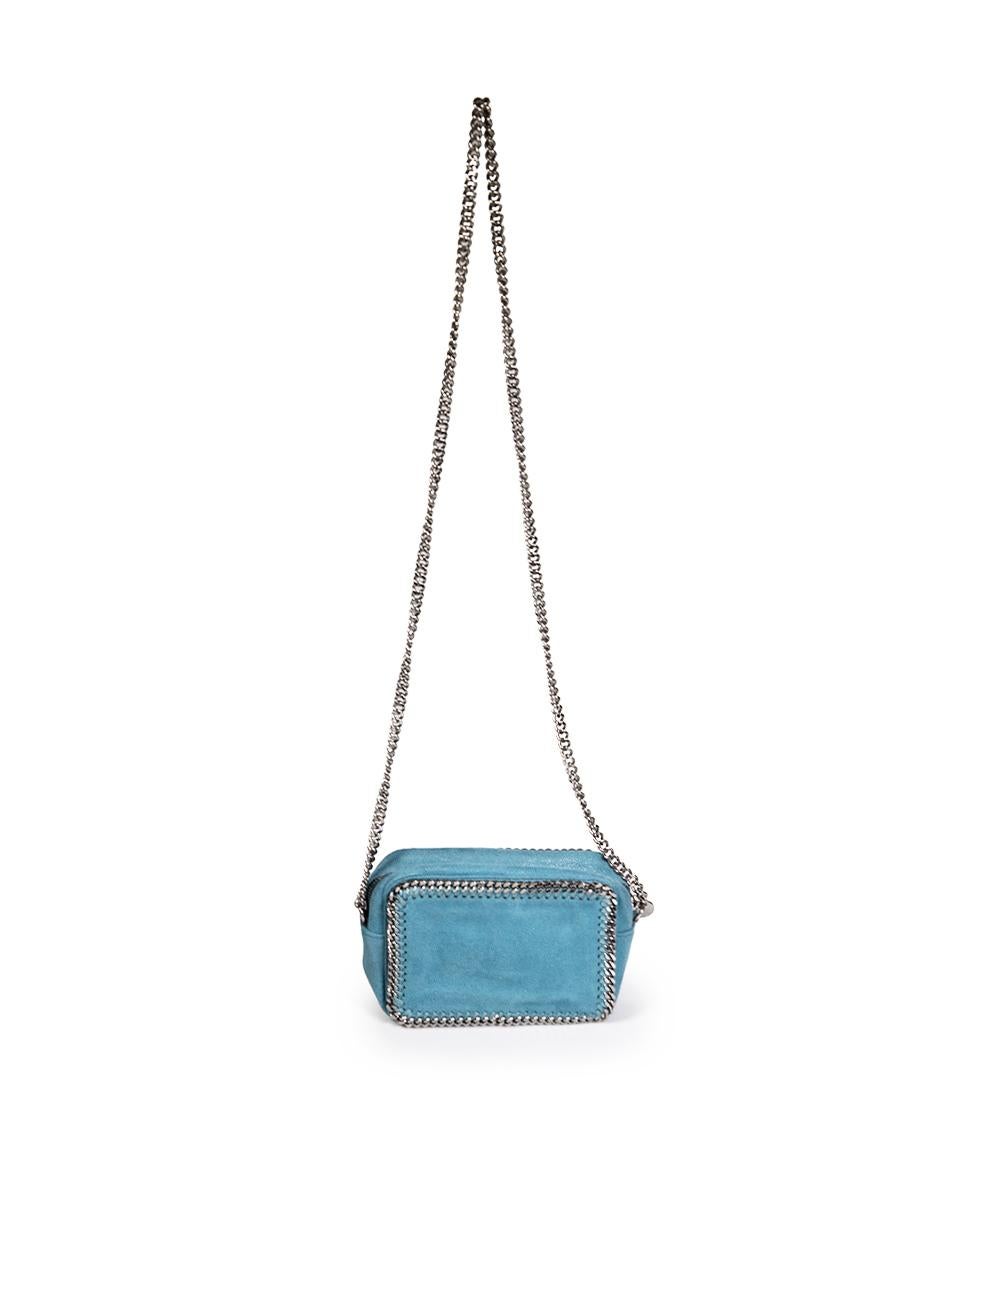 Stella McCartney Teal Vegan Suede Falabella Bag In Excellent Condition In London, GB